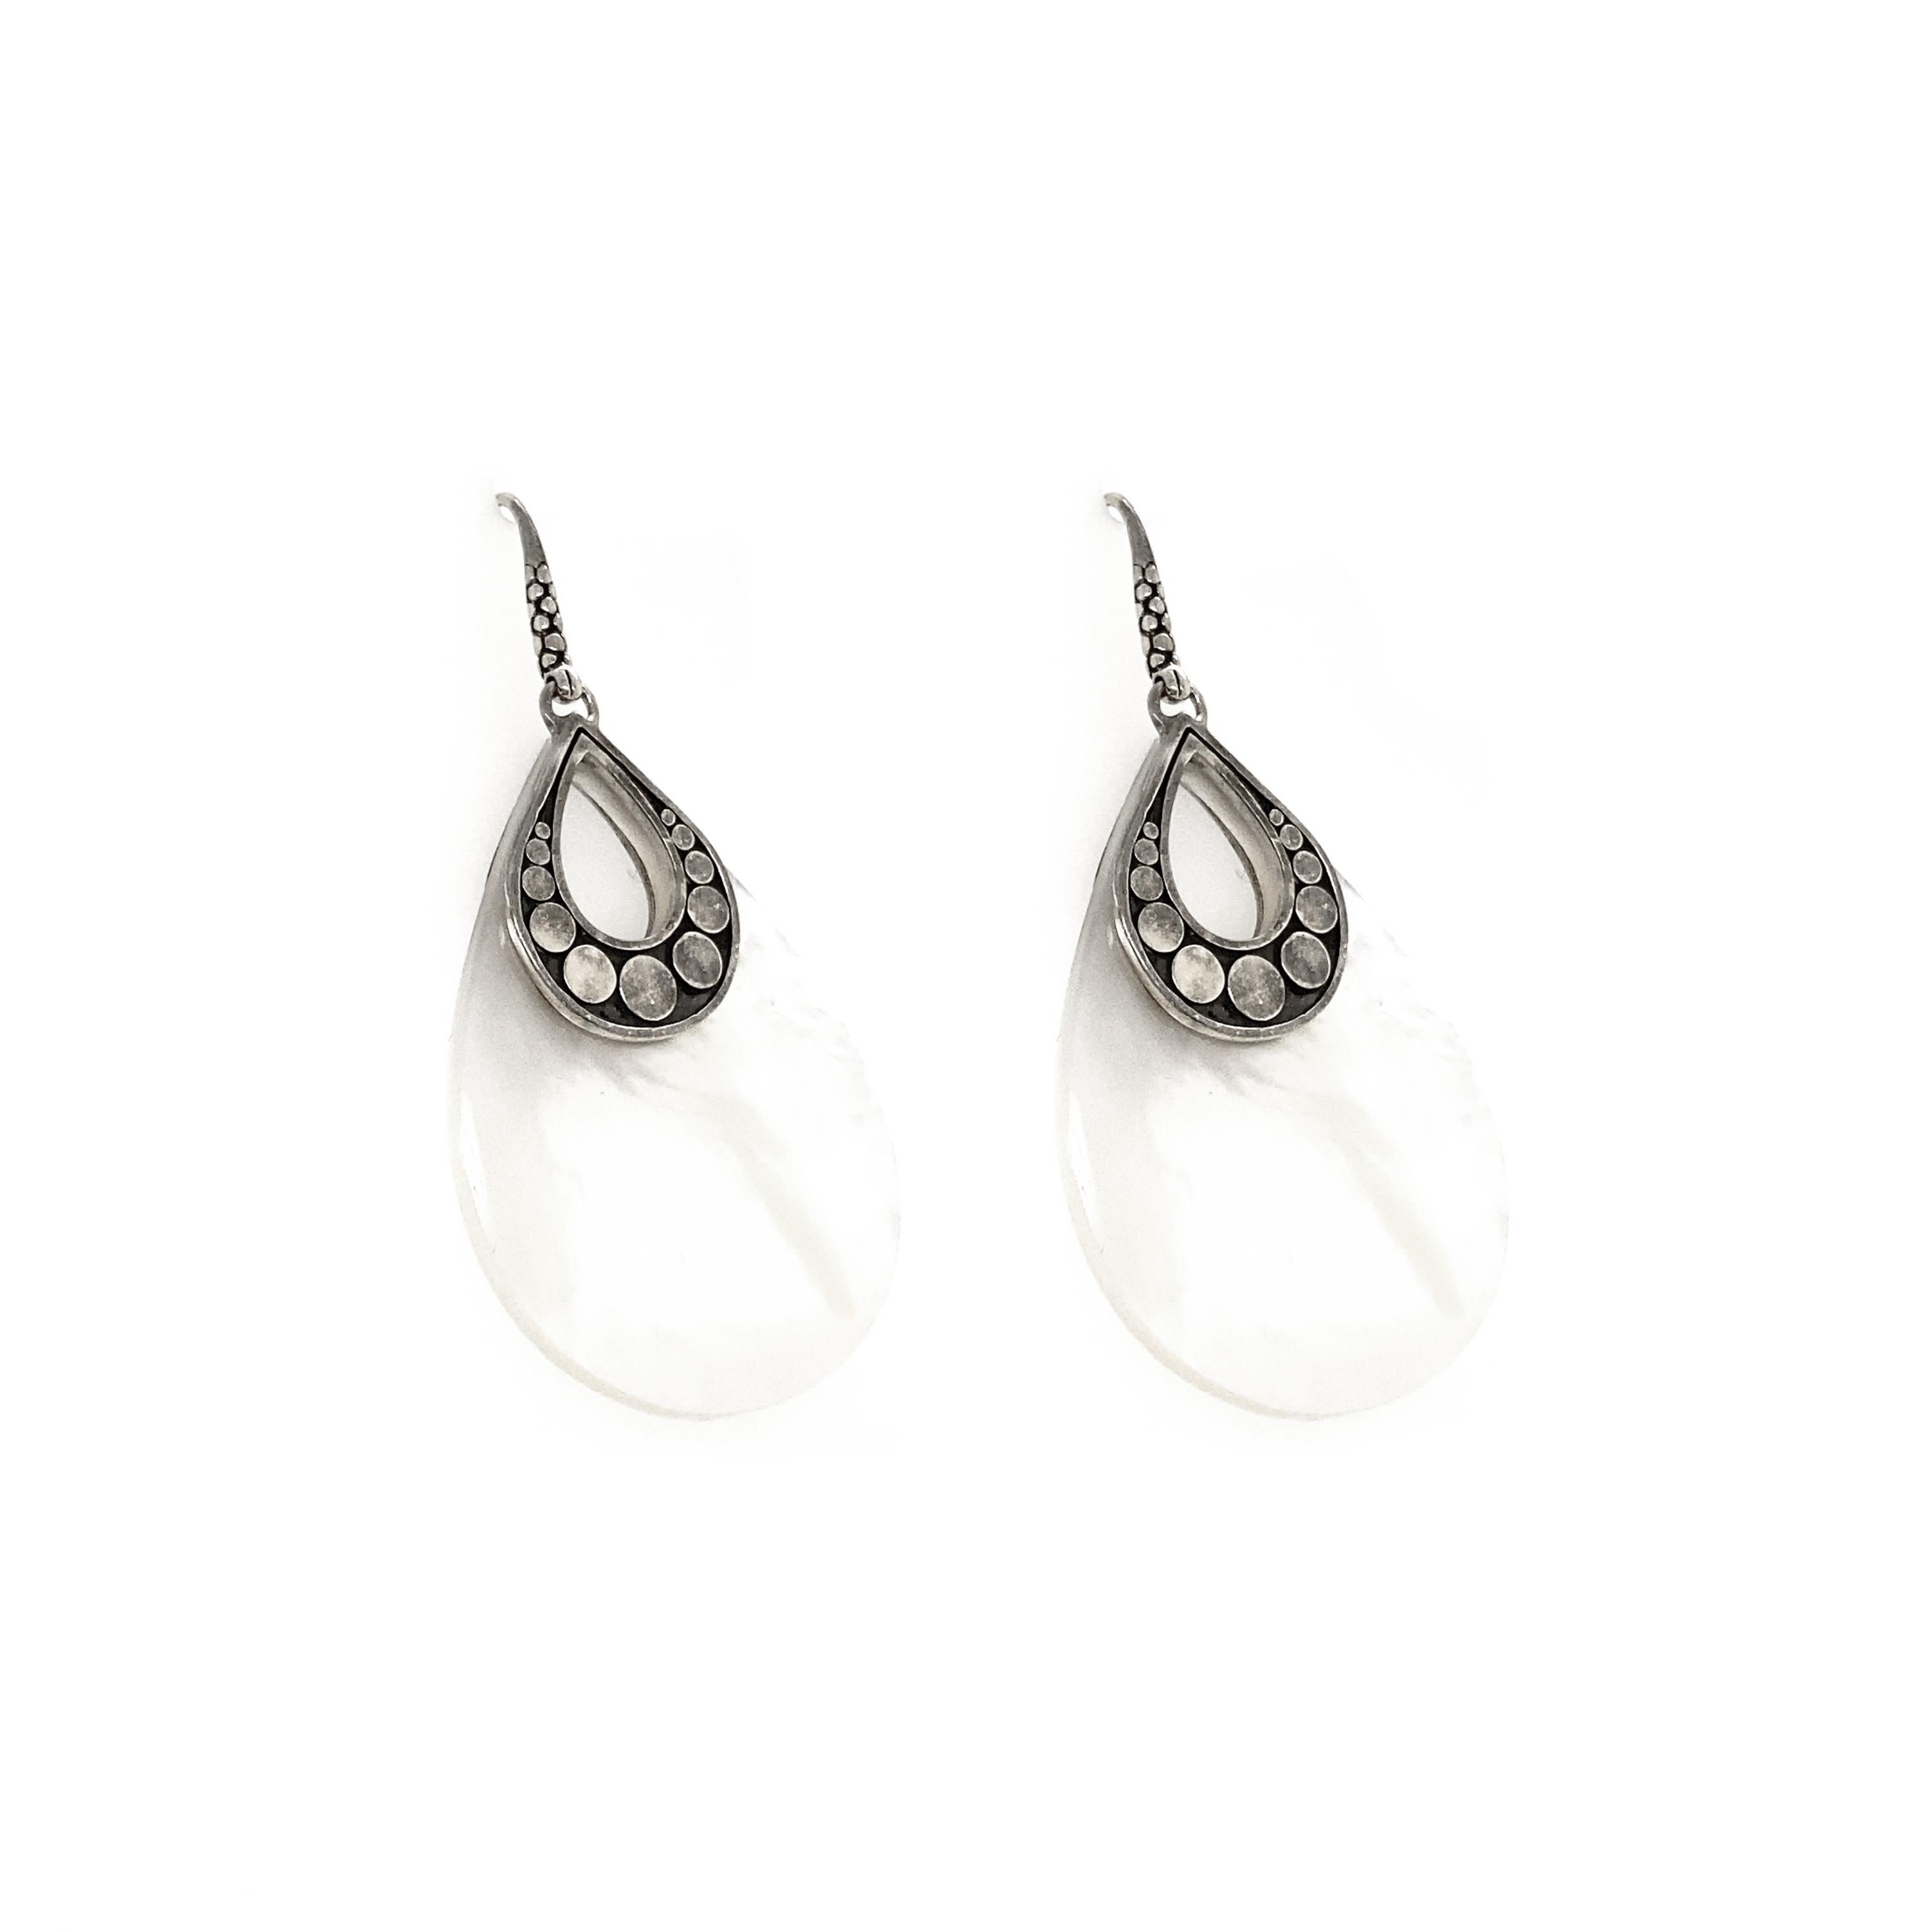 Sterling silver and white mother of pearl drop earrings from the Dot collection. 58mm long. French wire backs.